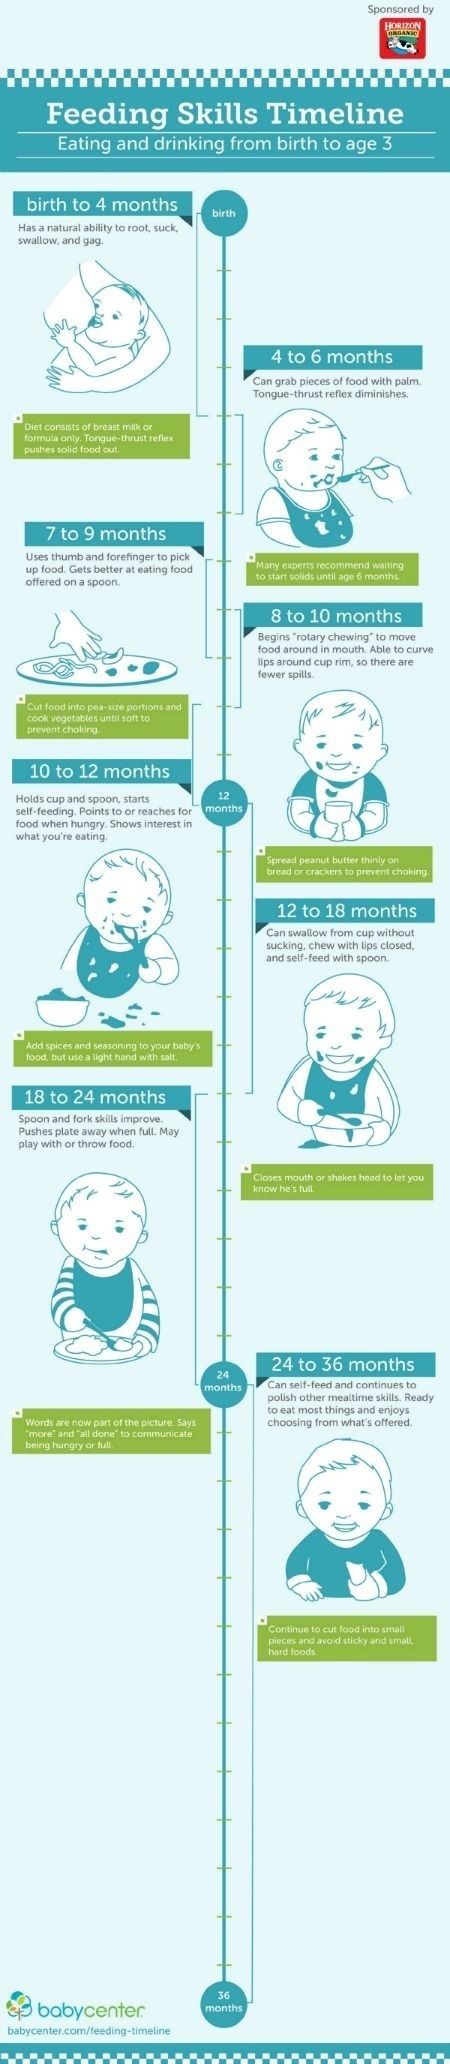 17. Get an idea of how involved your child should be in feeding themselves: -   Helpful Charts For New Parents